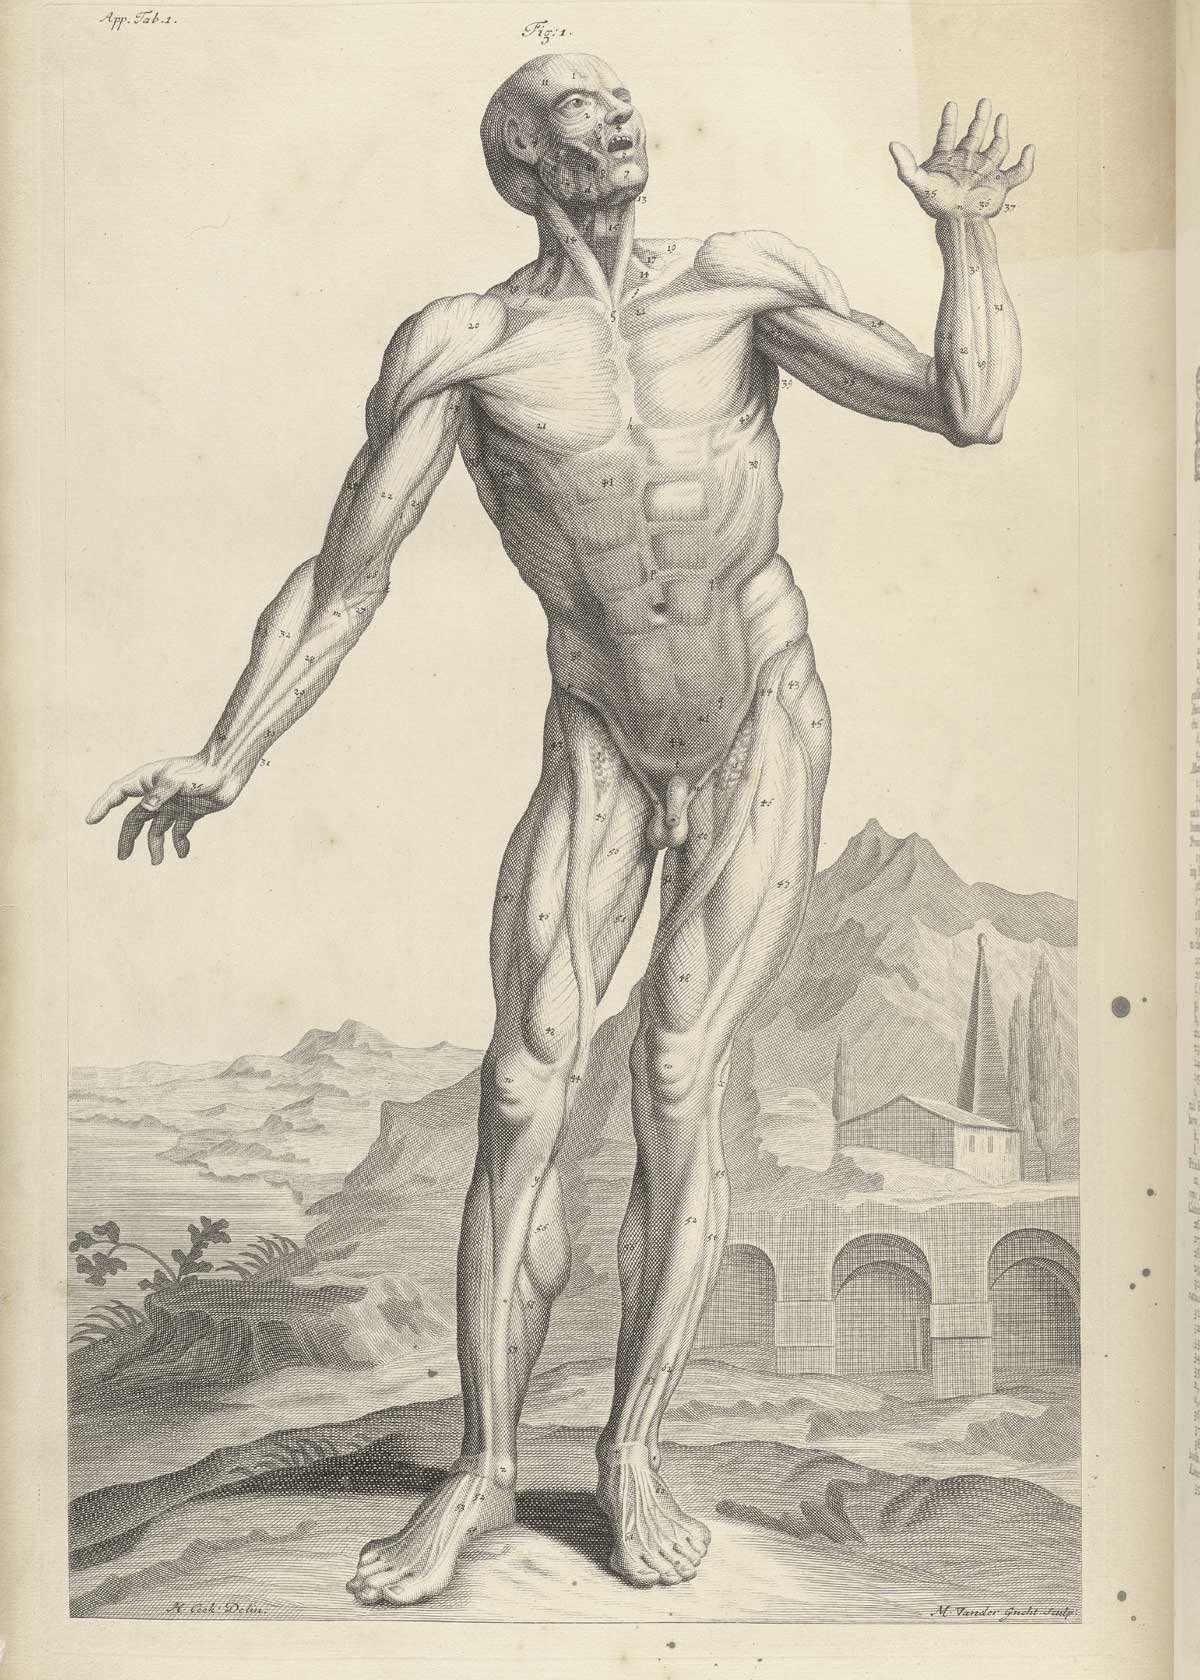 Engraving of a nude male facing anatomical figure showing the musculature of the whole front of the body from neck and chest to arms and legs, with right hand outstretched to the side and left hand upraised, in a pastoral setting with classical ruins and a farmhouse in the background, from William Cowper’s Anatomy of the humane bodies, NLM Call no.: WZ 250 C876a 1698.